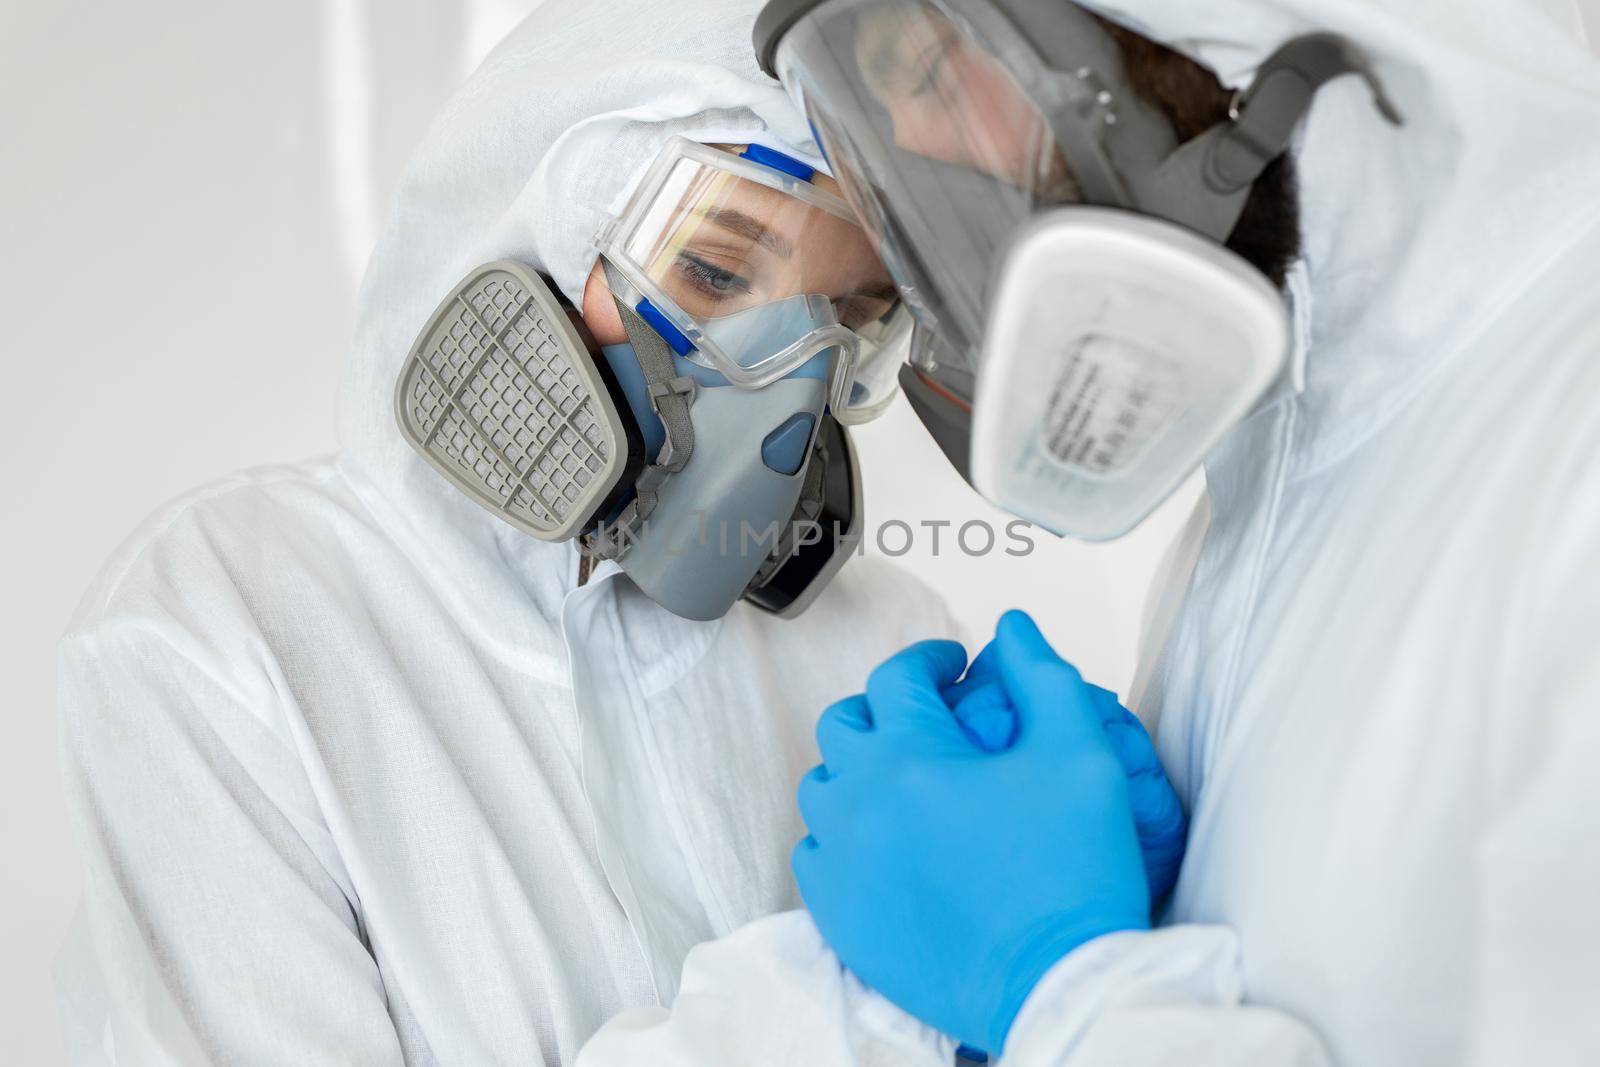 Portraits of the doctor: a man and a woman in protective suits and respirators holding hands during quarantine. Covid-19.